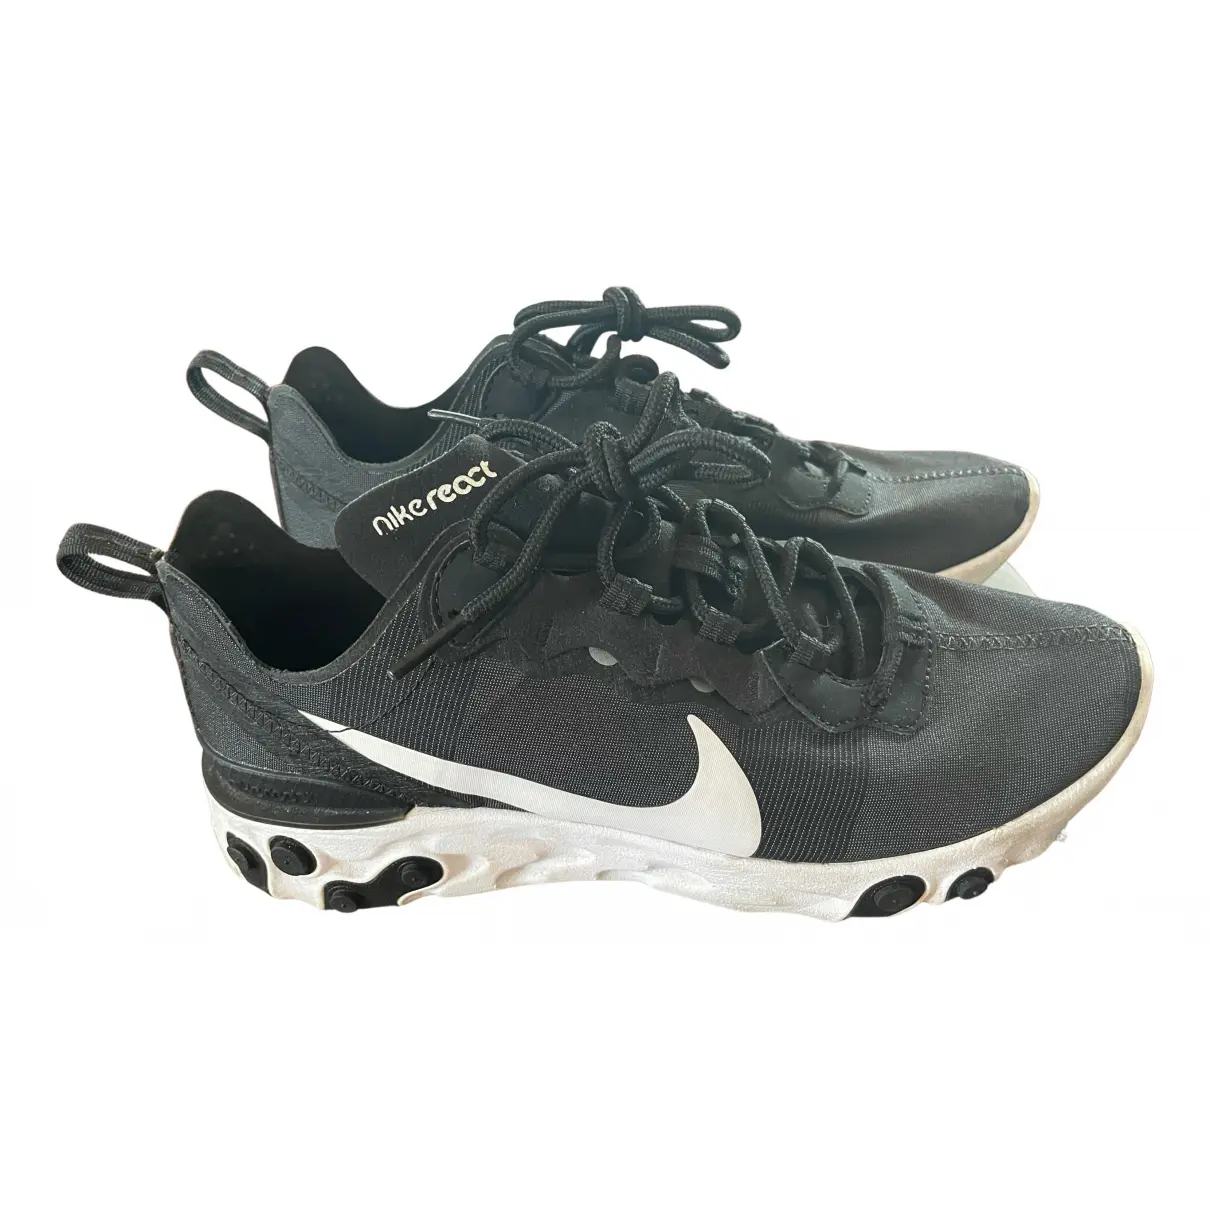 React element 55 cloth trainers Nike